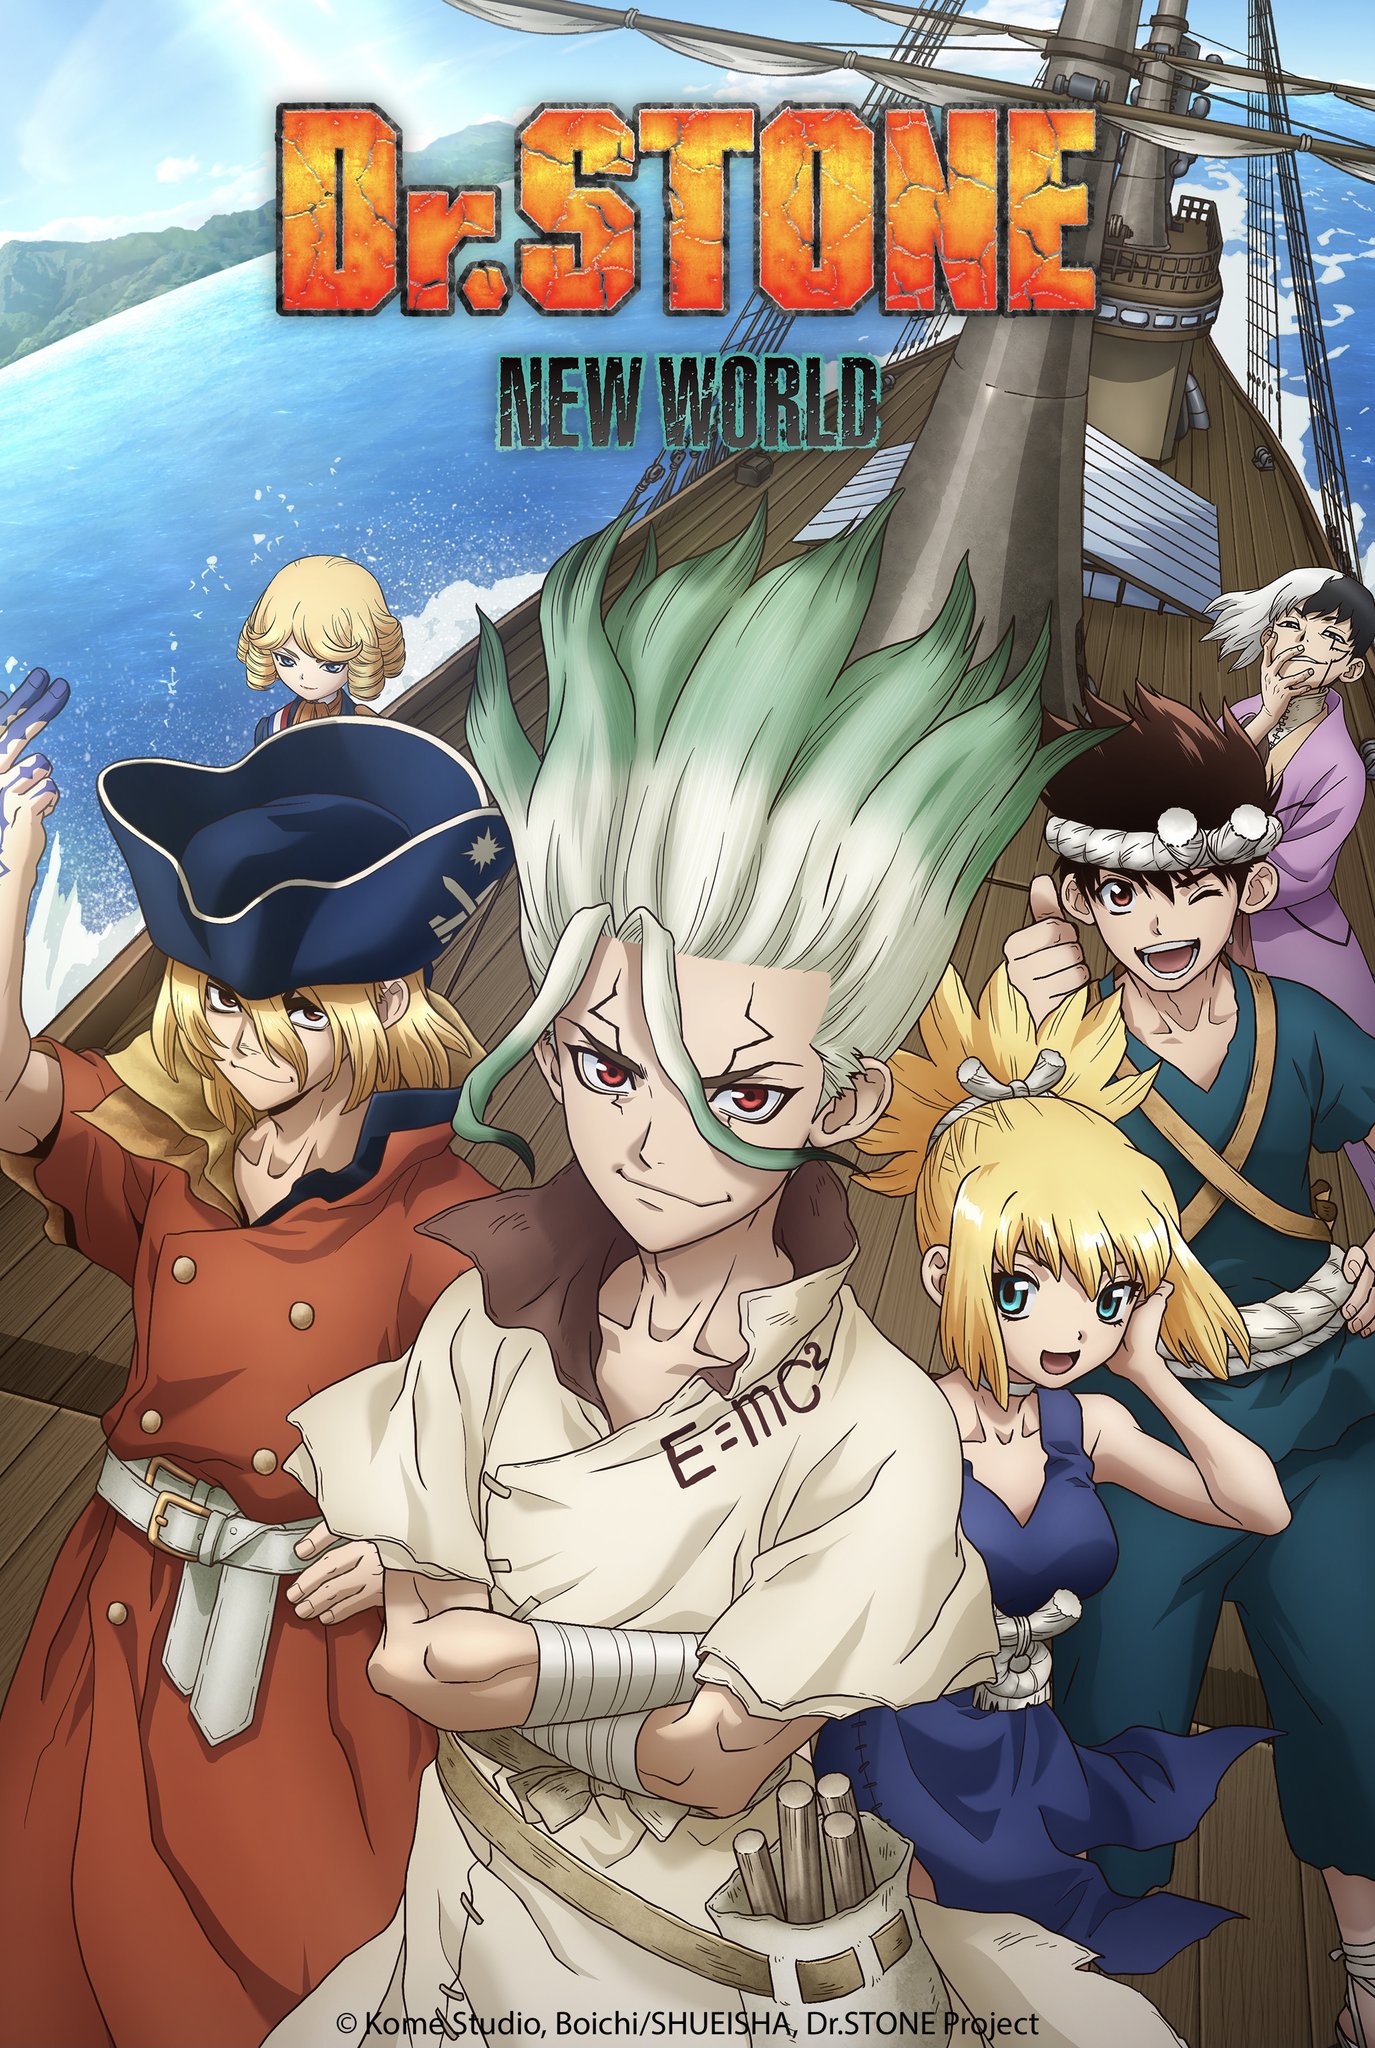 Dr. STONE NEW WORLD (Season 3) Part 2 - New Trailer!! Part 2 of the anime  is scheduled for OCTOBER 12!! — Streaming in India on…